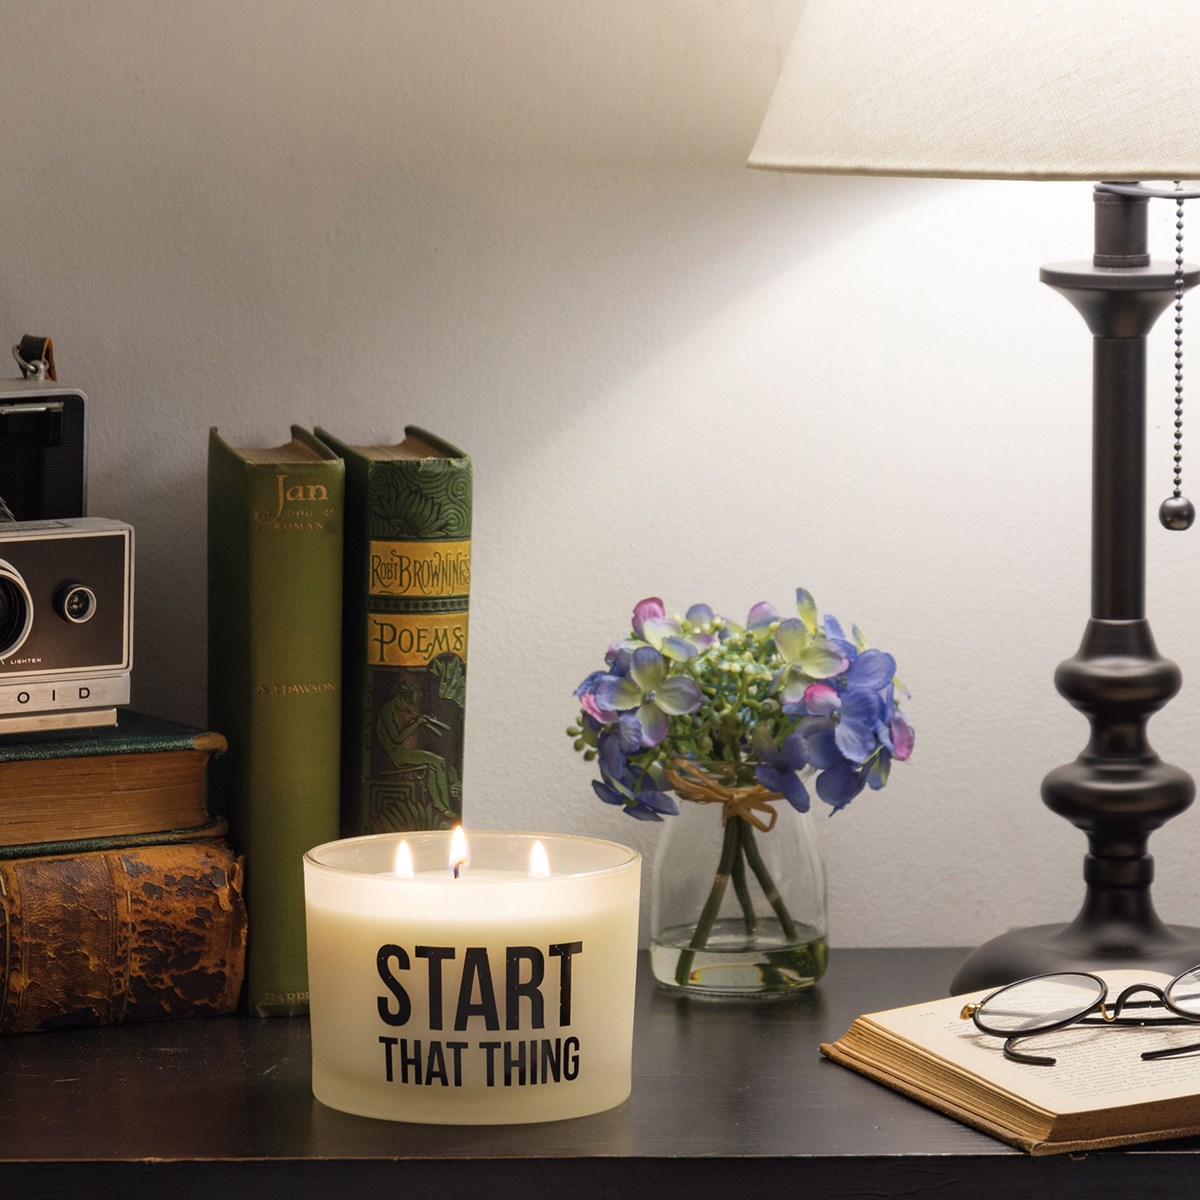 Start That Thing Jar Candle - Soy Wax, Glass, Cotton